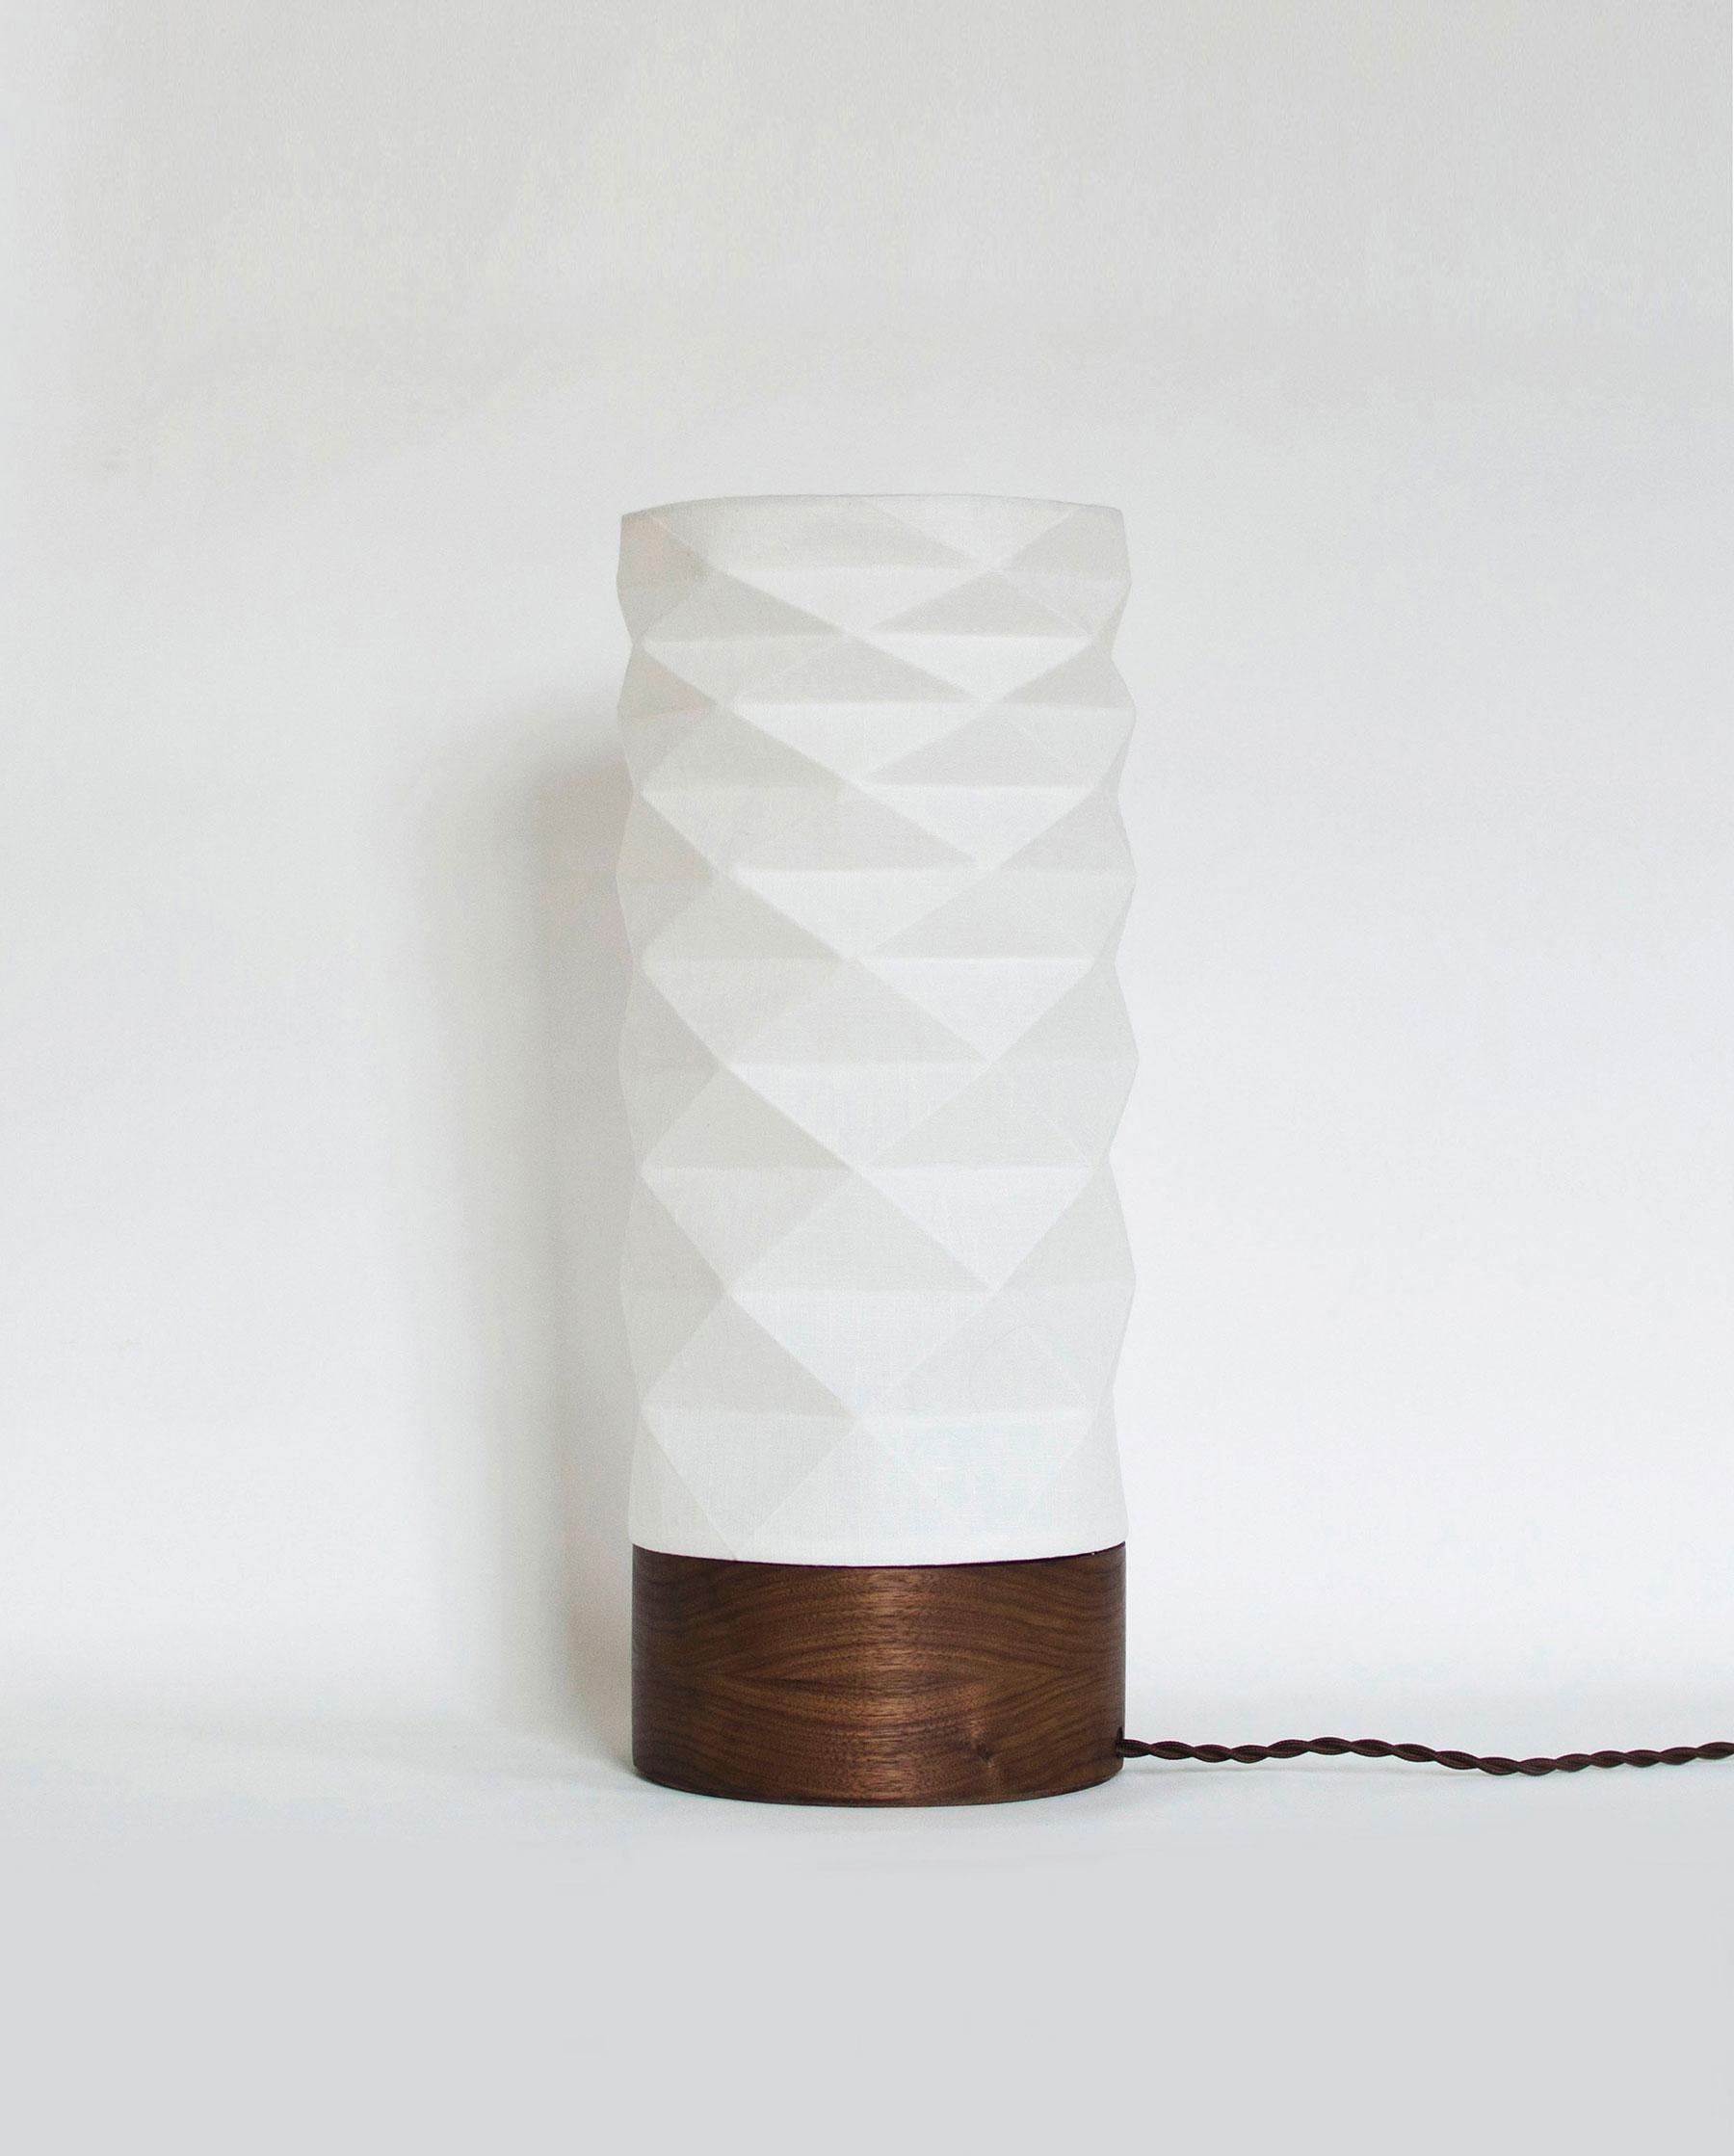 This handcrafted table lamp will bring to your interior a unique and modern functional piece. The origami-inspired lampshade is made of laminated linen fabric providing a bright, yet soft ambient light and showing the beautiful texture of the linen.